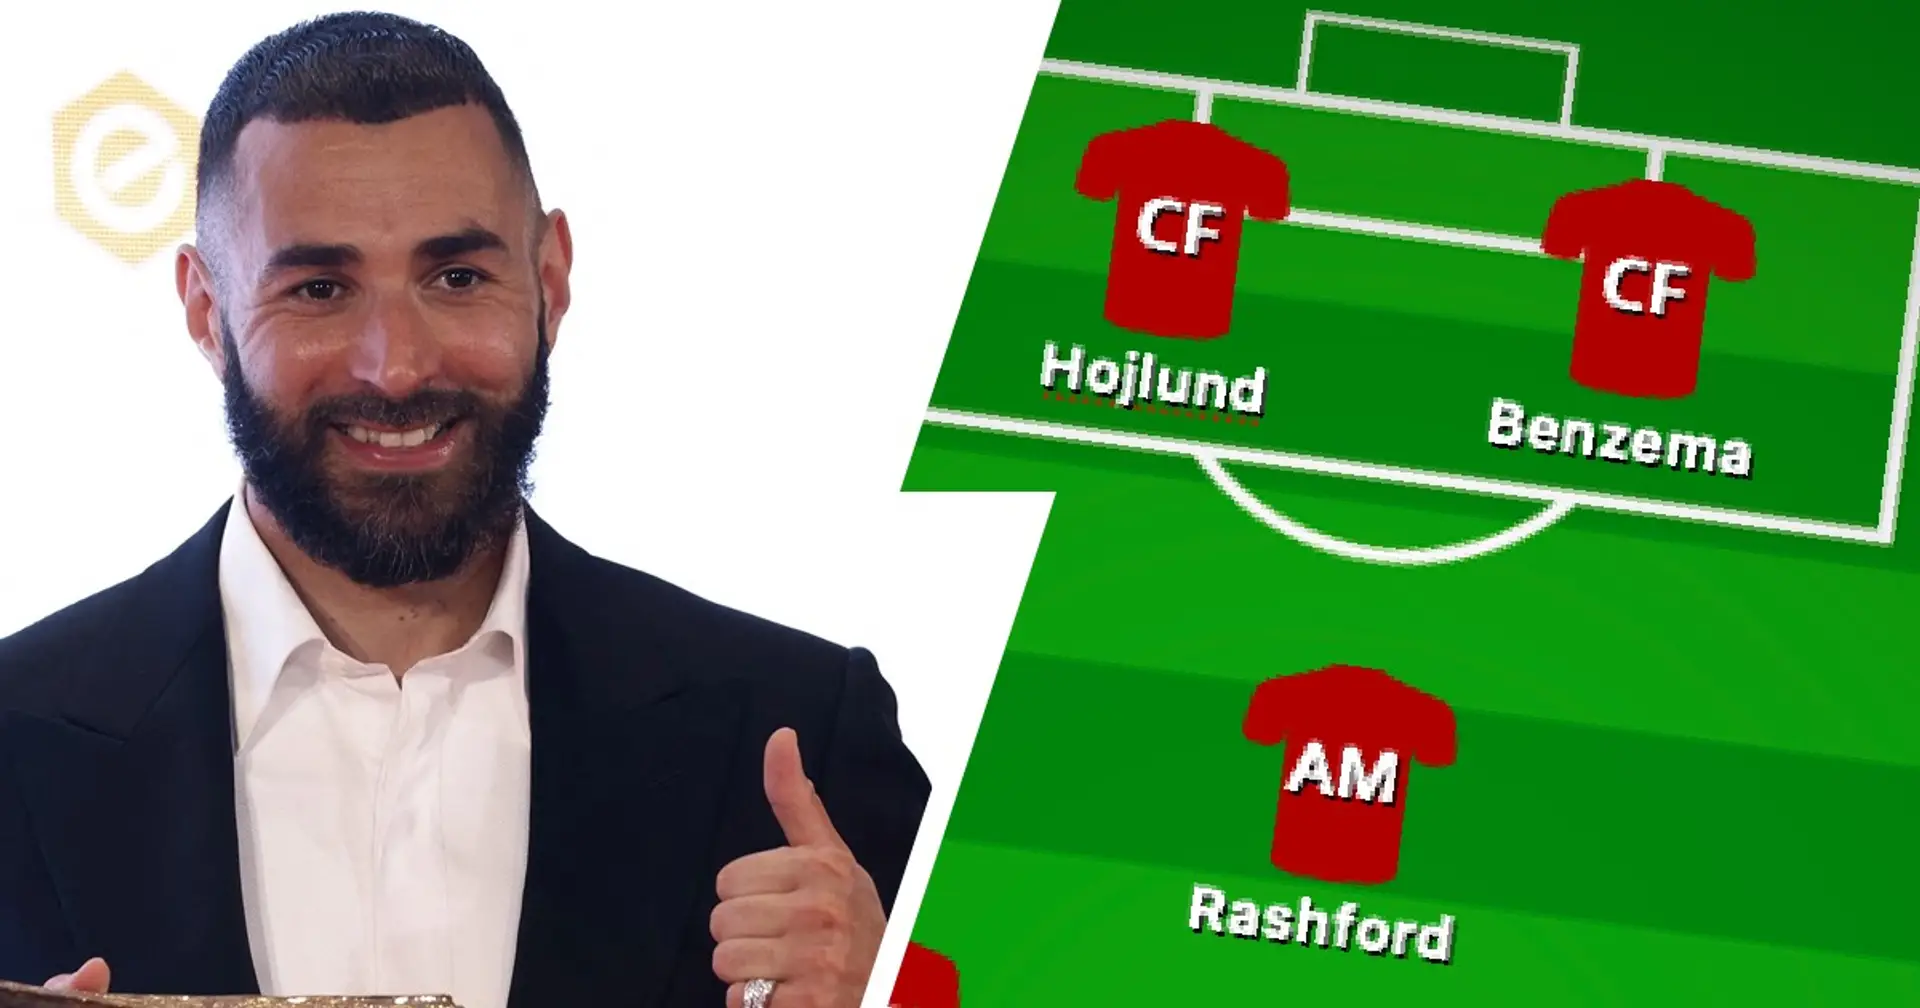 3 ways Man United could line up with Karim Benzema - shown in pics